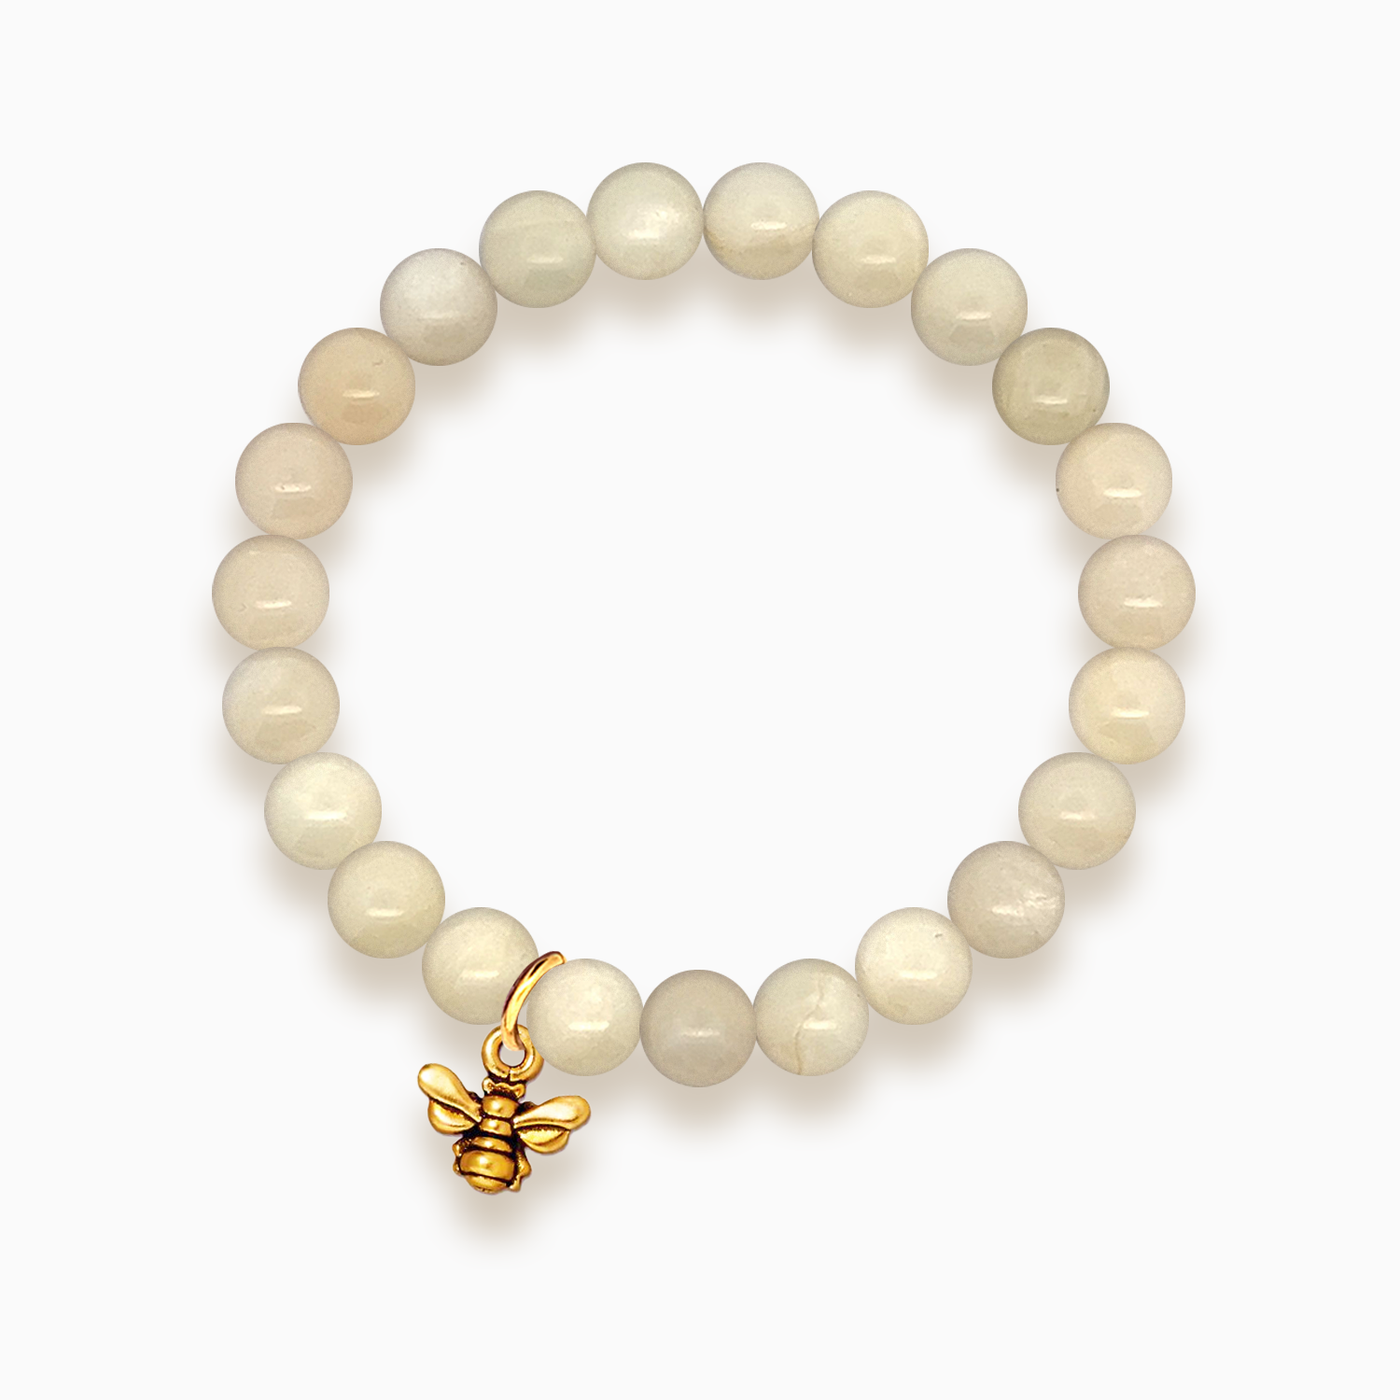 Gemstone Stacker Bracelet With Gold Plated Small Bee Charm